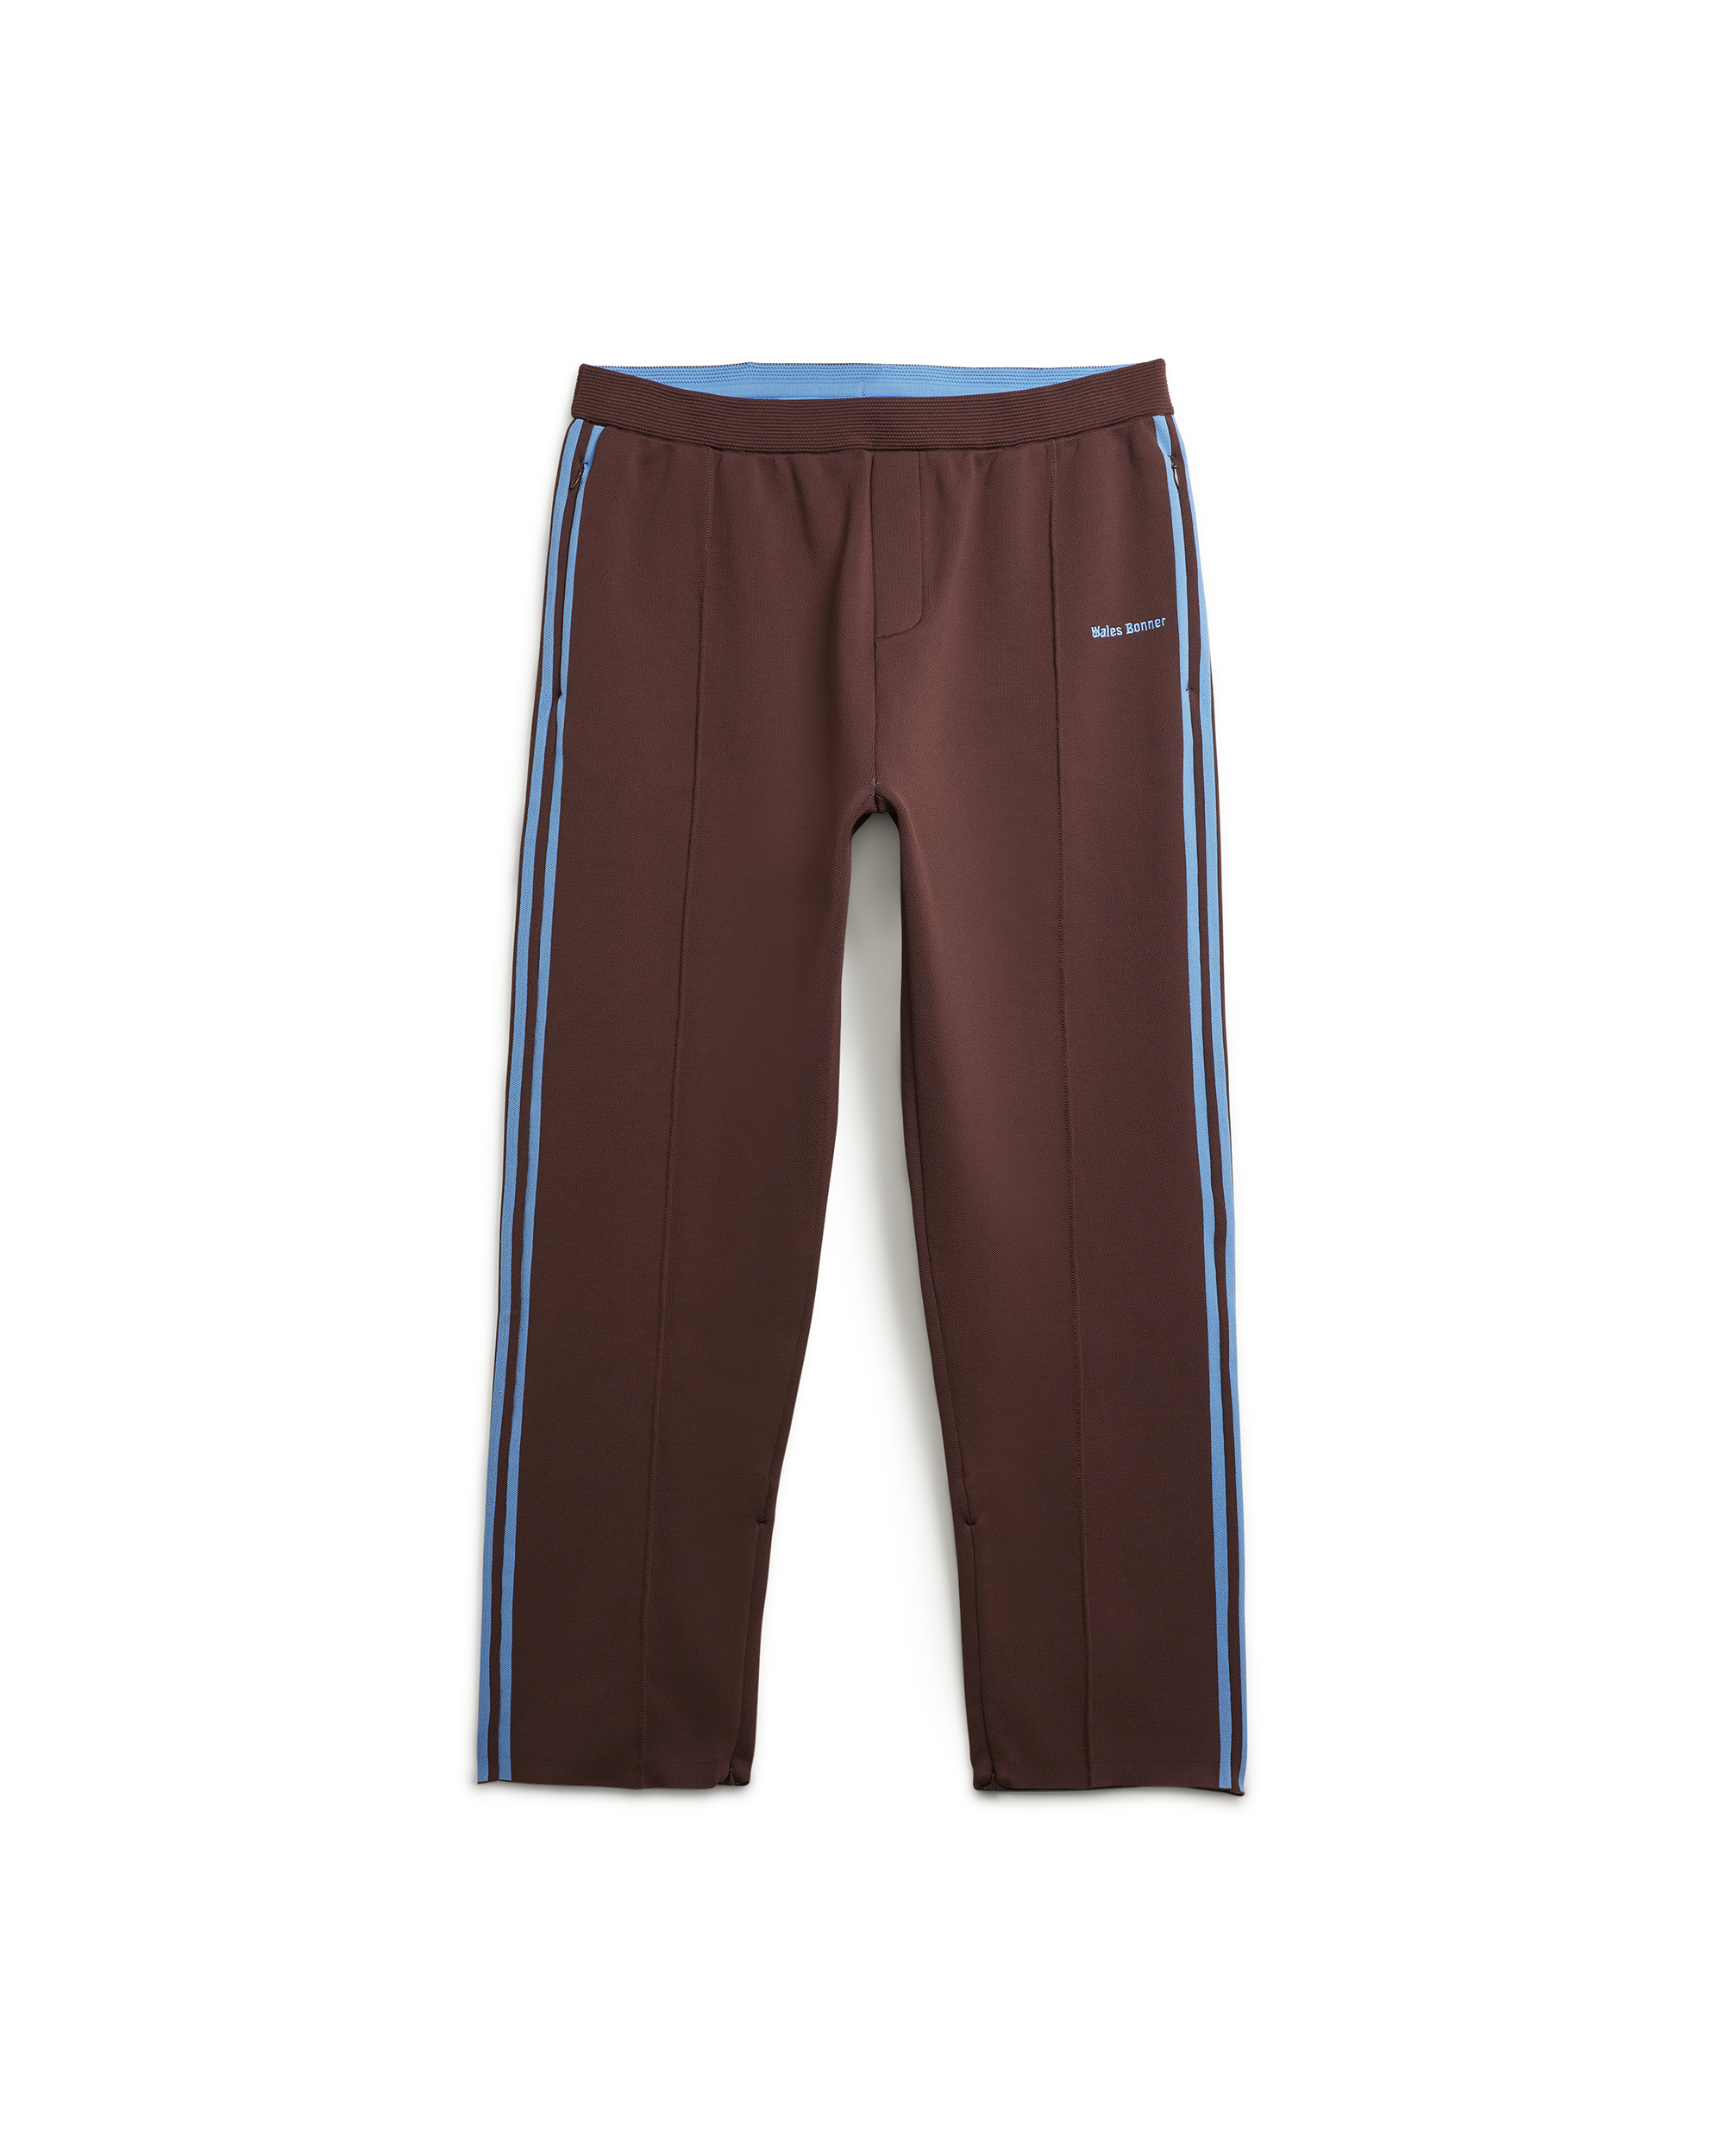 Wales Bonner Track Pants - Mystery Brown